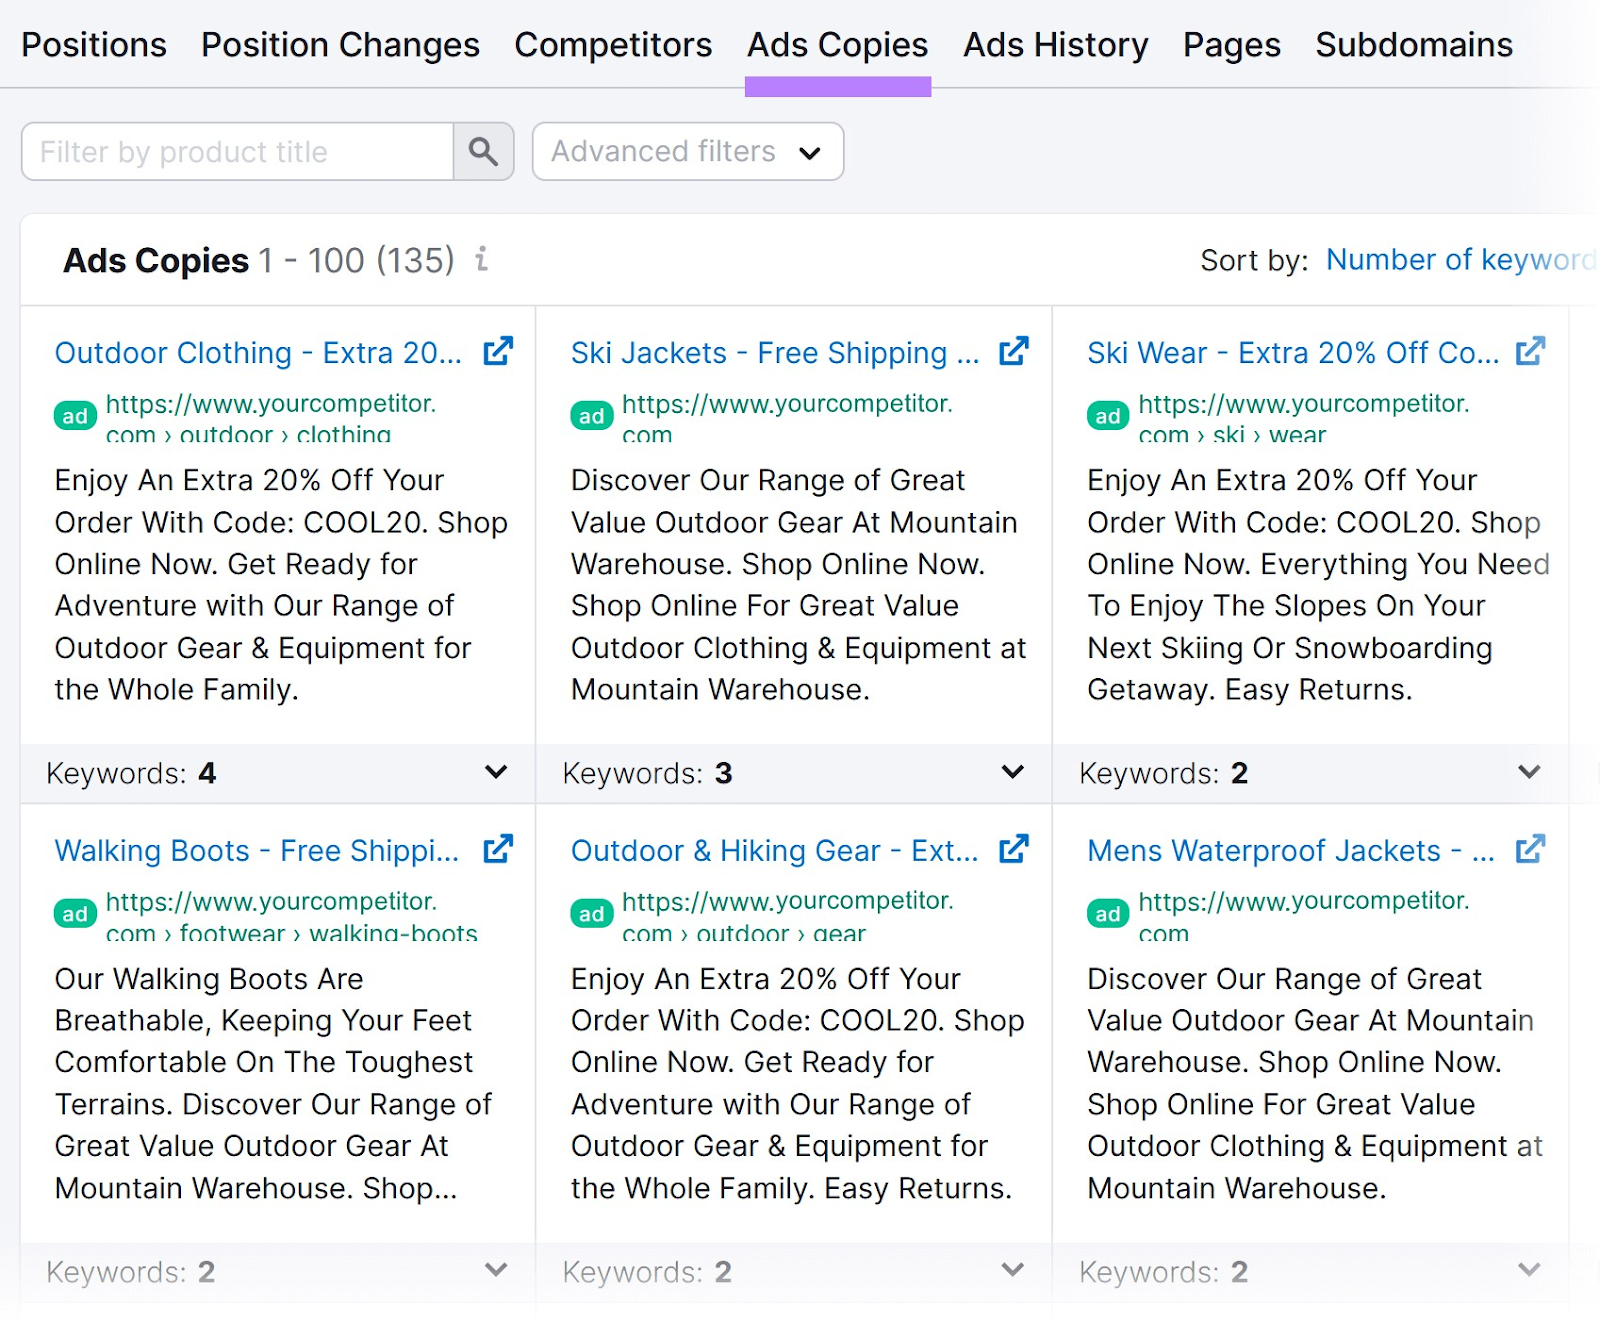 “Ads Copies” tab in Advertising Research tool shows the exact ads of your competitors